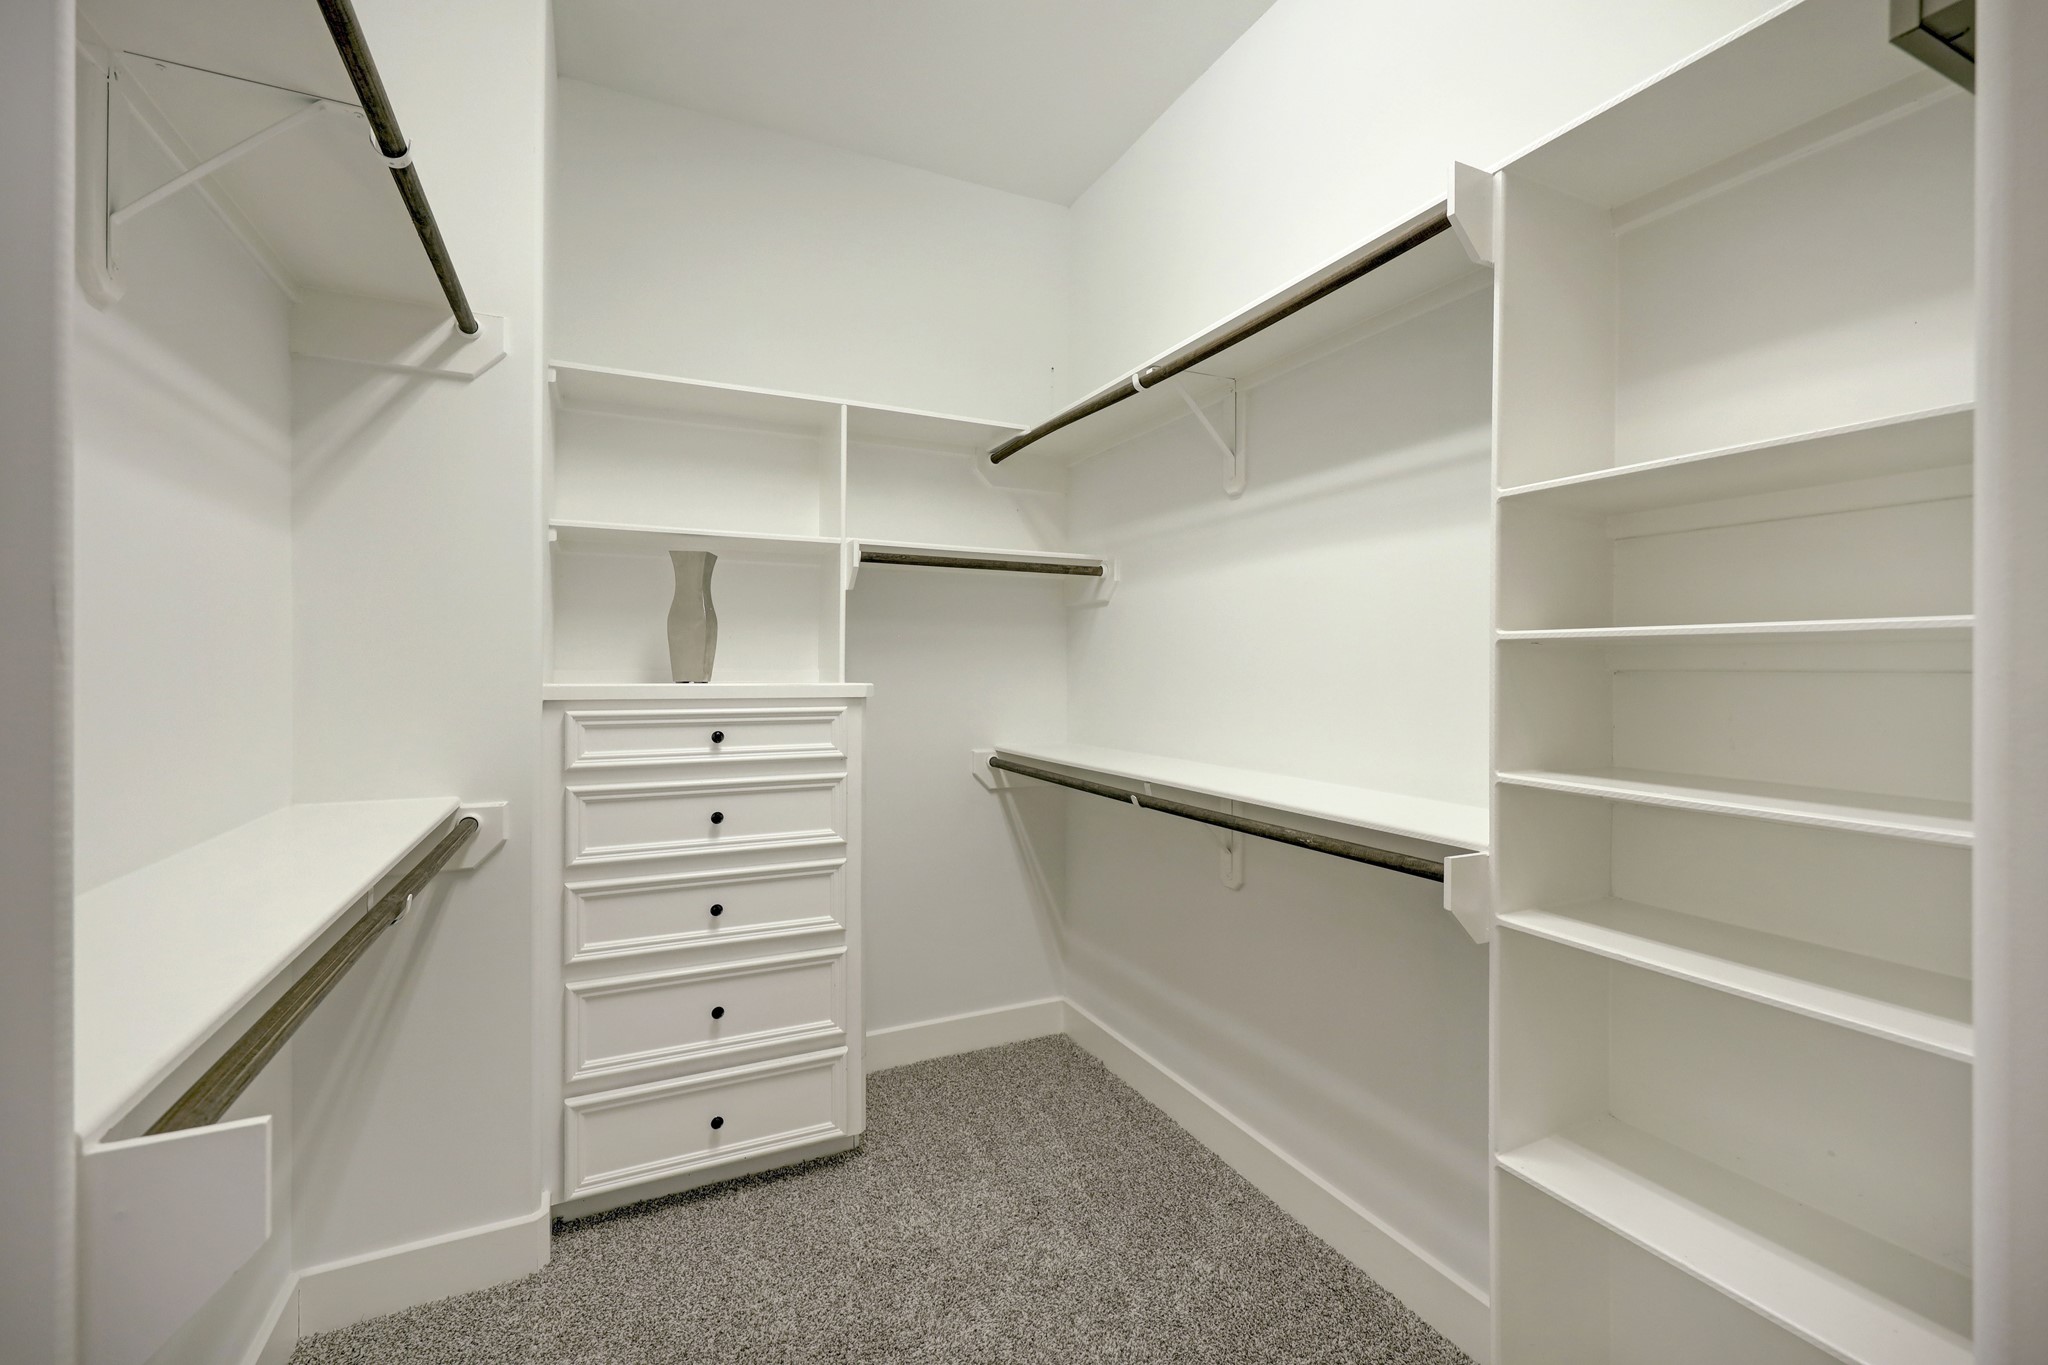 The primary suite also includes a spacious walk-in closet with hanging rods, built-in shelves, and an integrated chest of drawers.